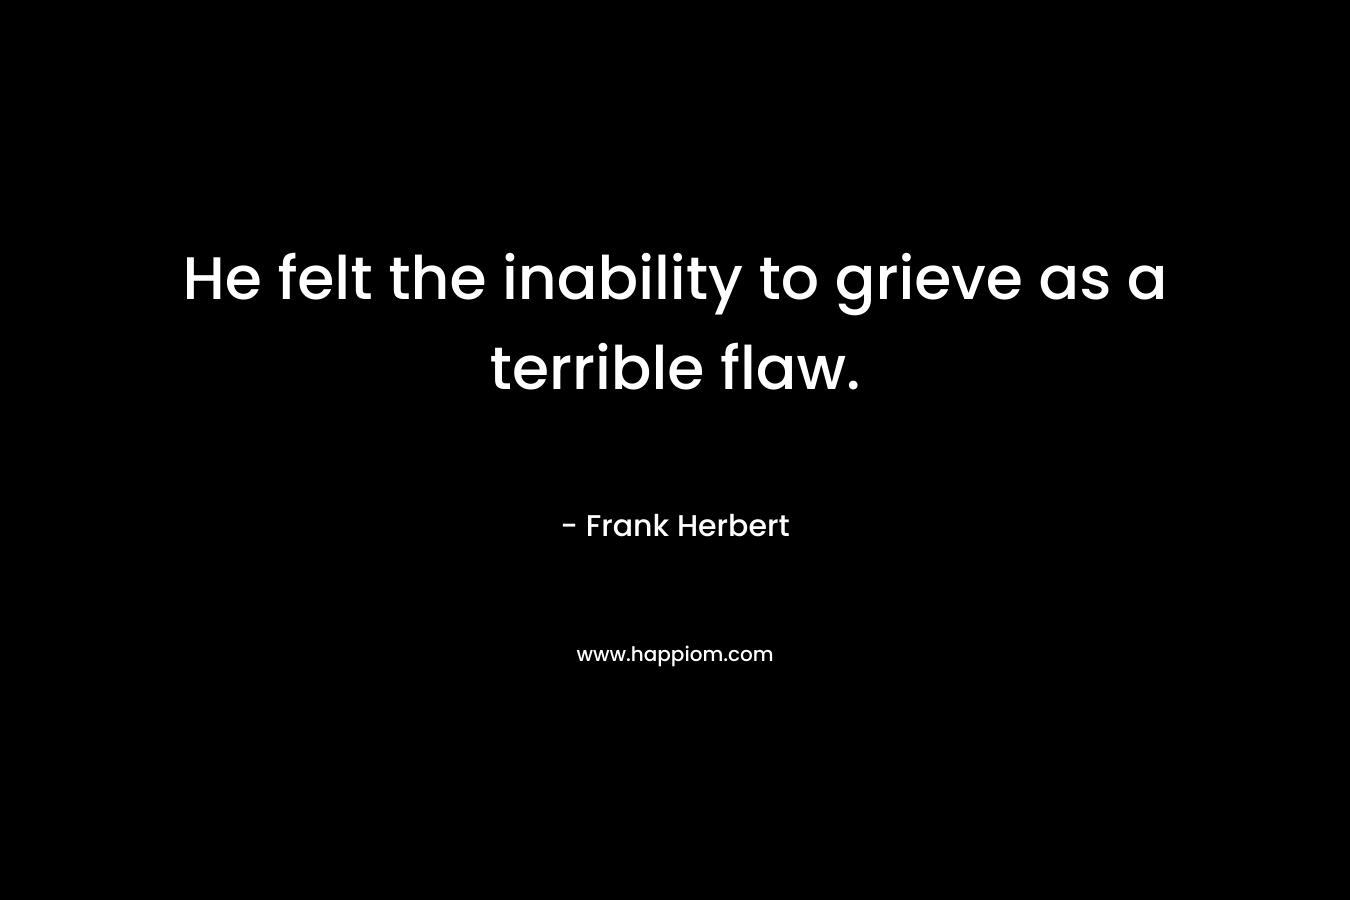 He felt the inability to grieve as a terrible flaw.